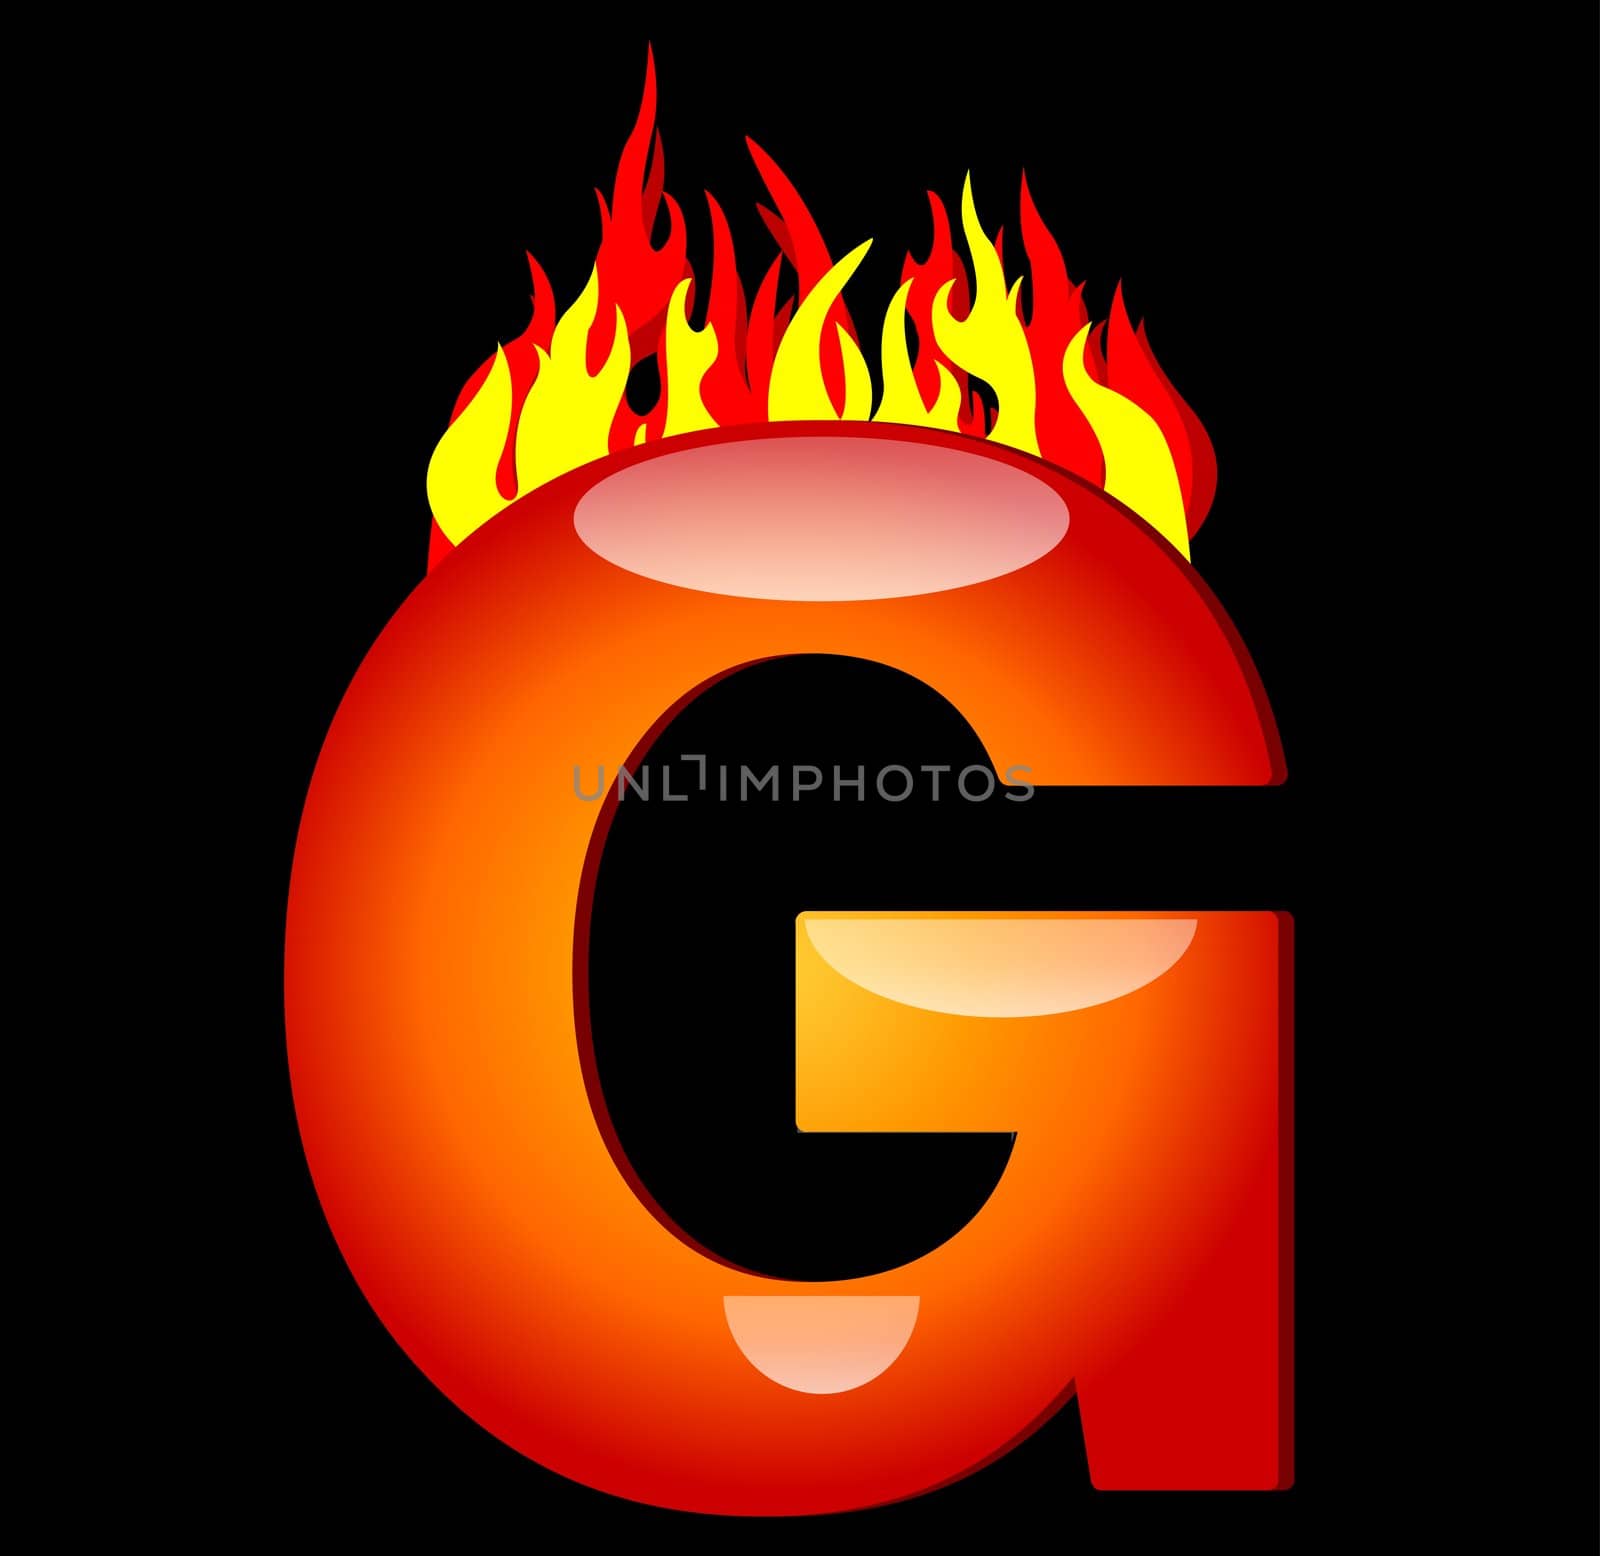 Letter G on Fire